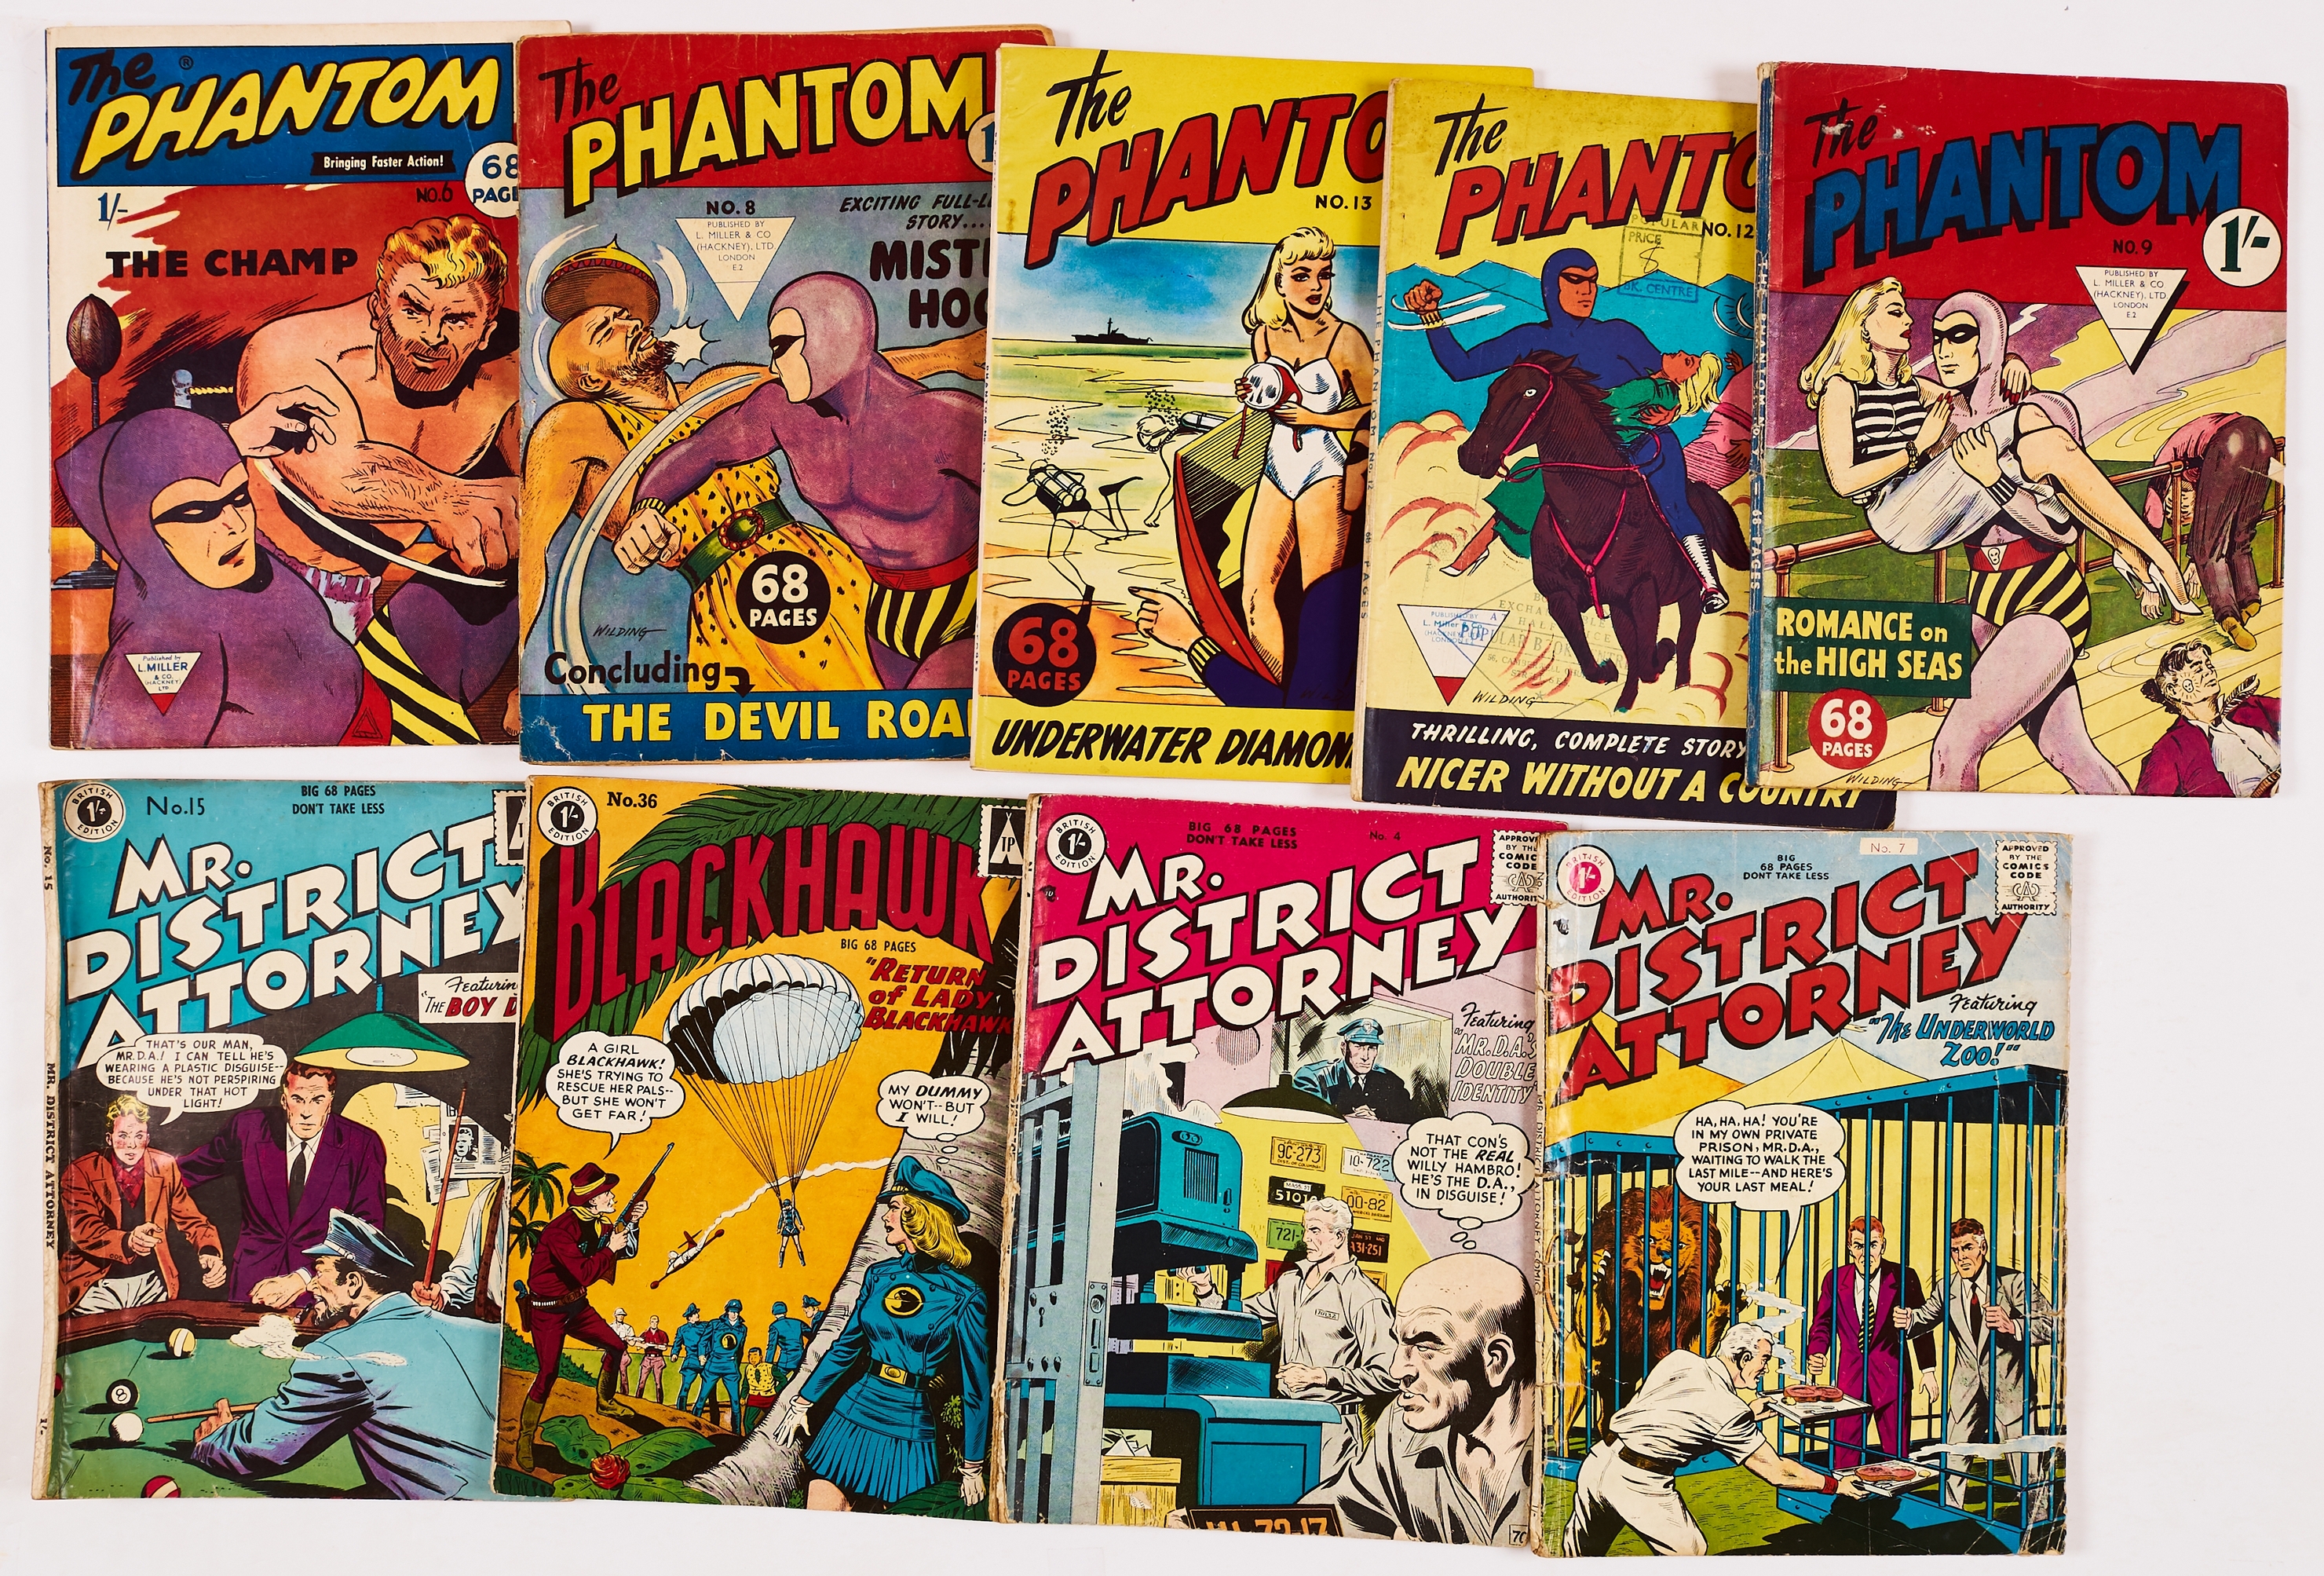 Phantom (1960s L Miller) 6, 8, 9, 12, 13. With Blackhawk 36 and Mr District Attorney 4, 7, 15.